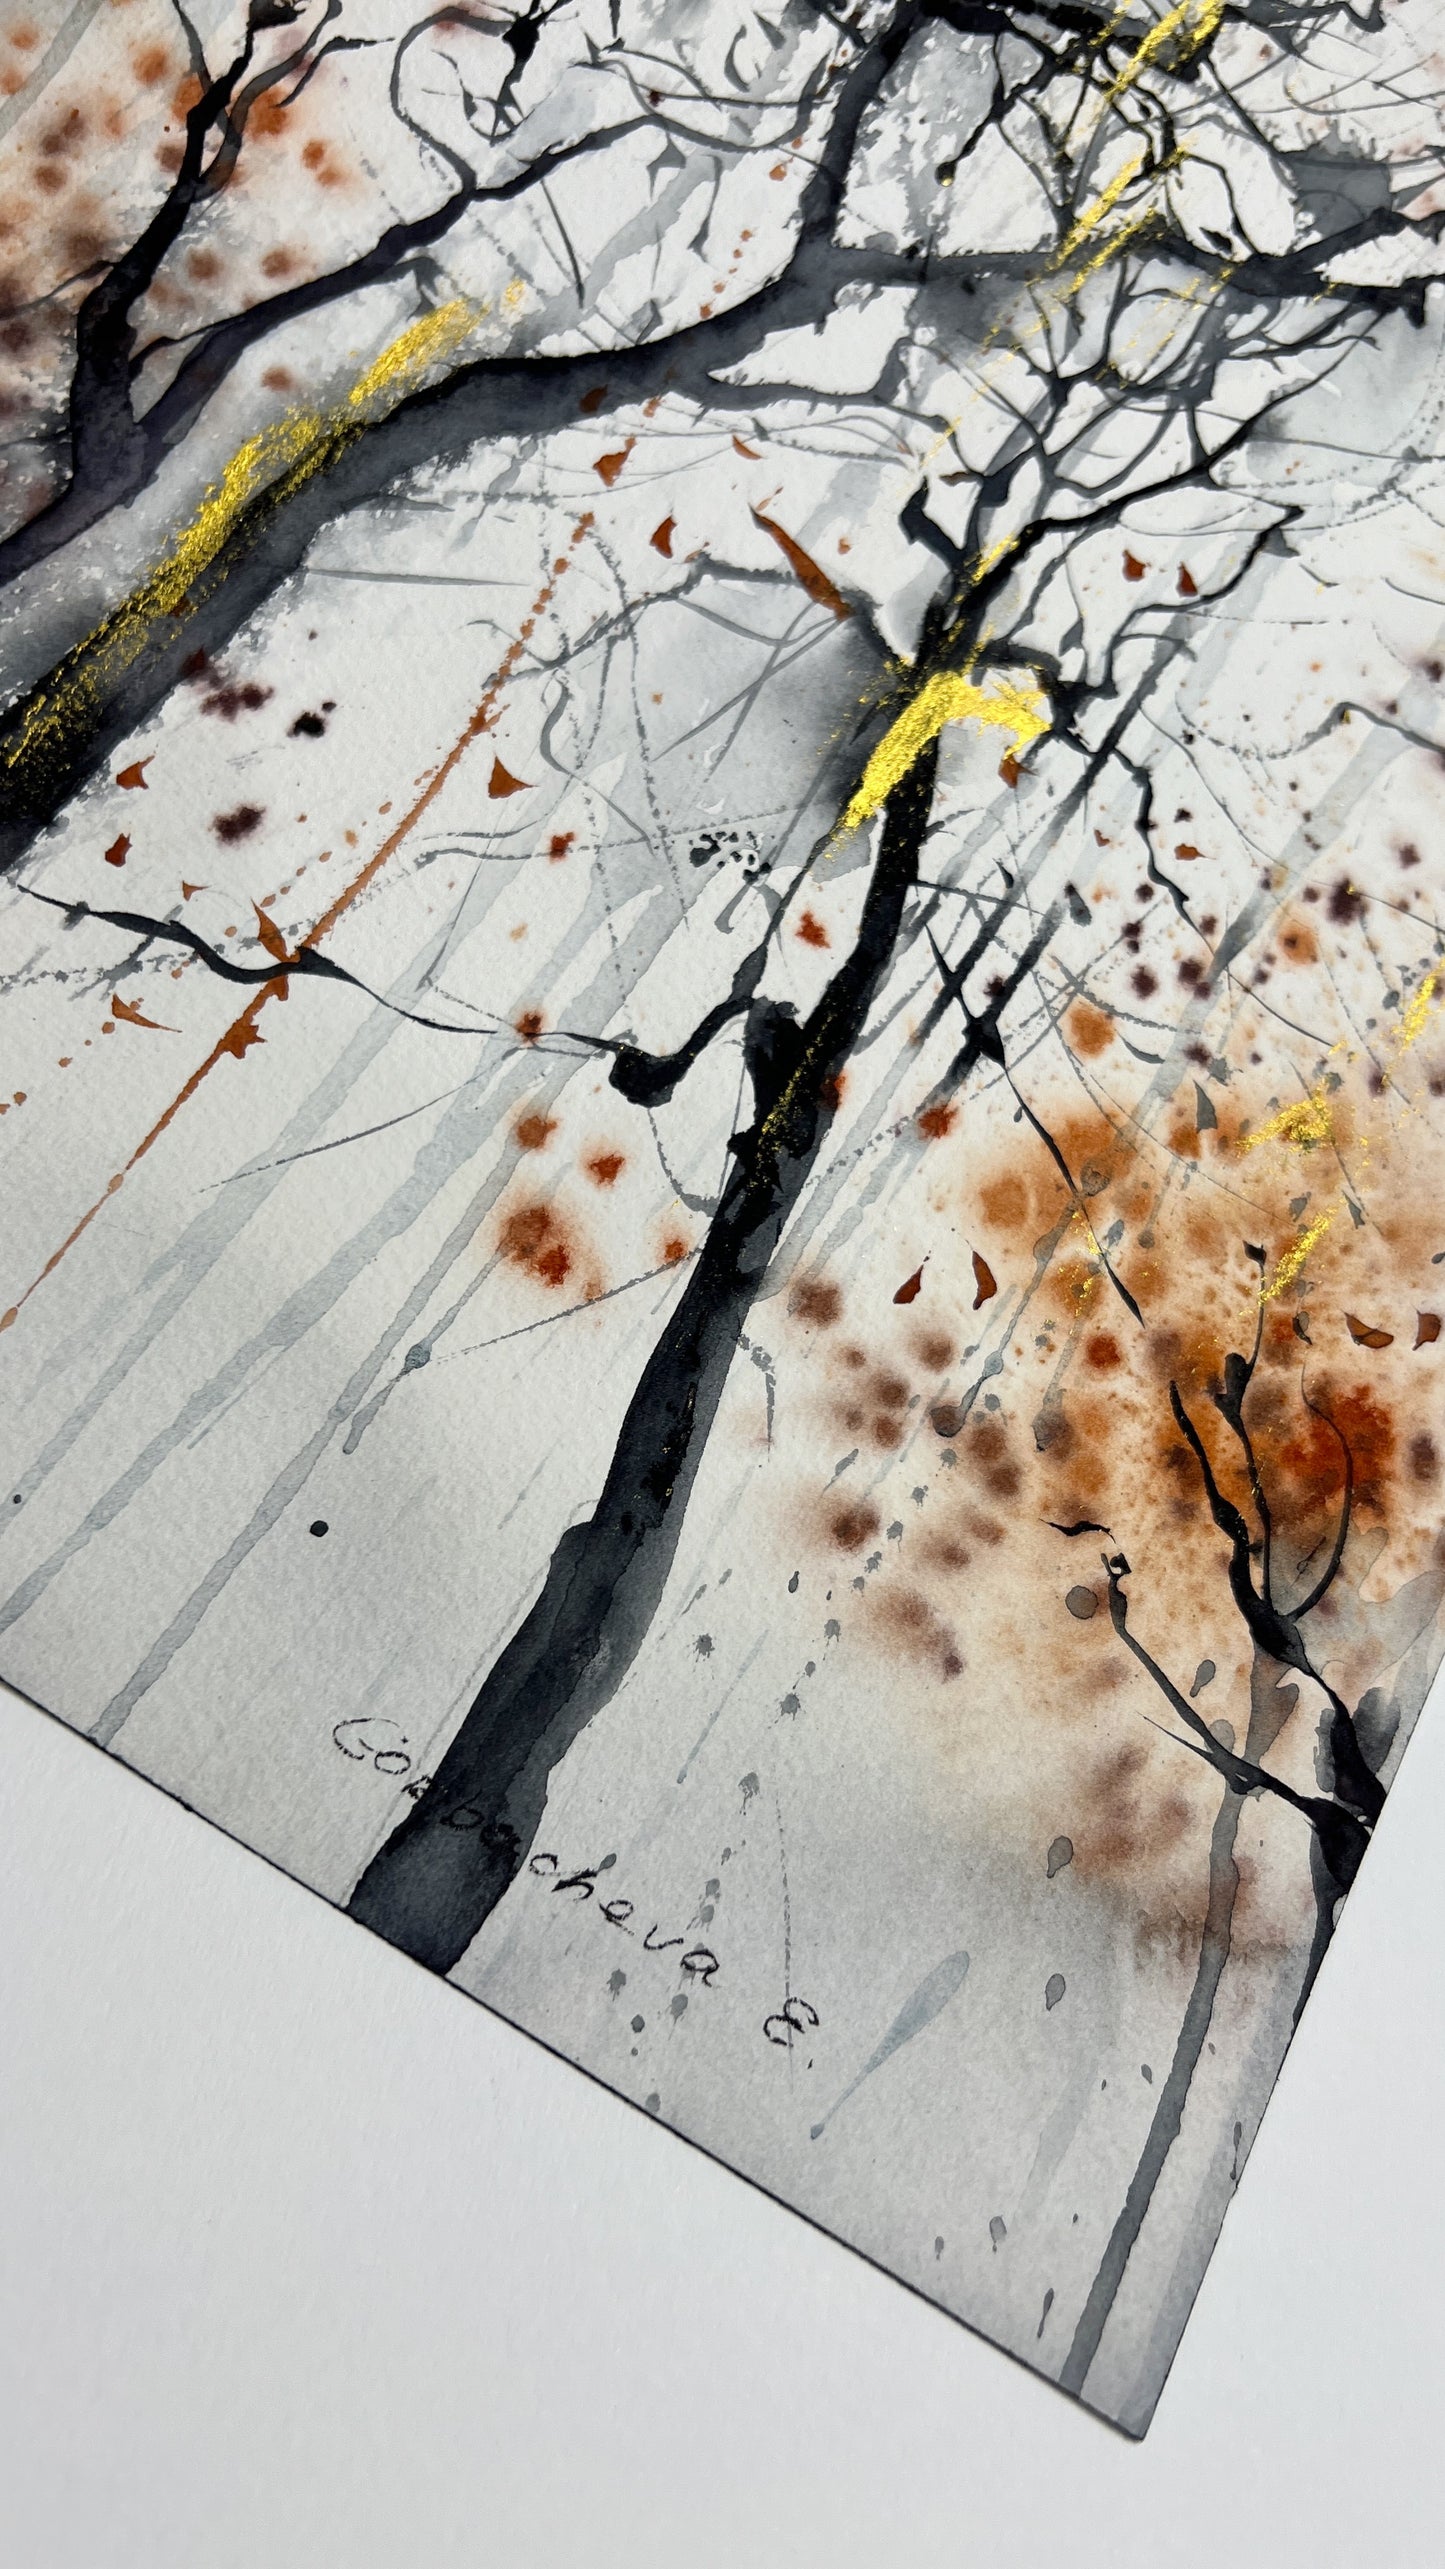 Abstract Tree Painting, Original Watercolor Artwork, Fall Forest, Modern Wall Art, Burnt Orange, Black, Unique Gift